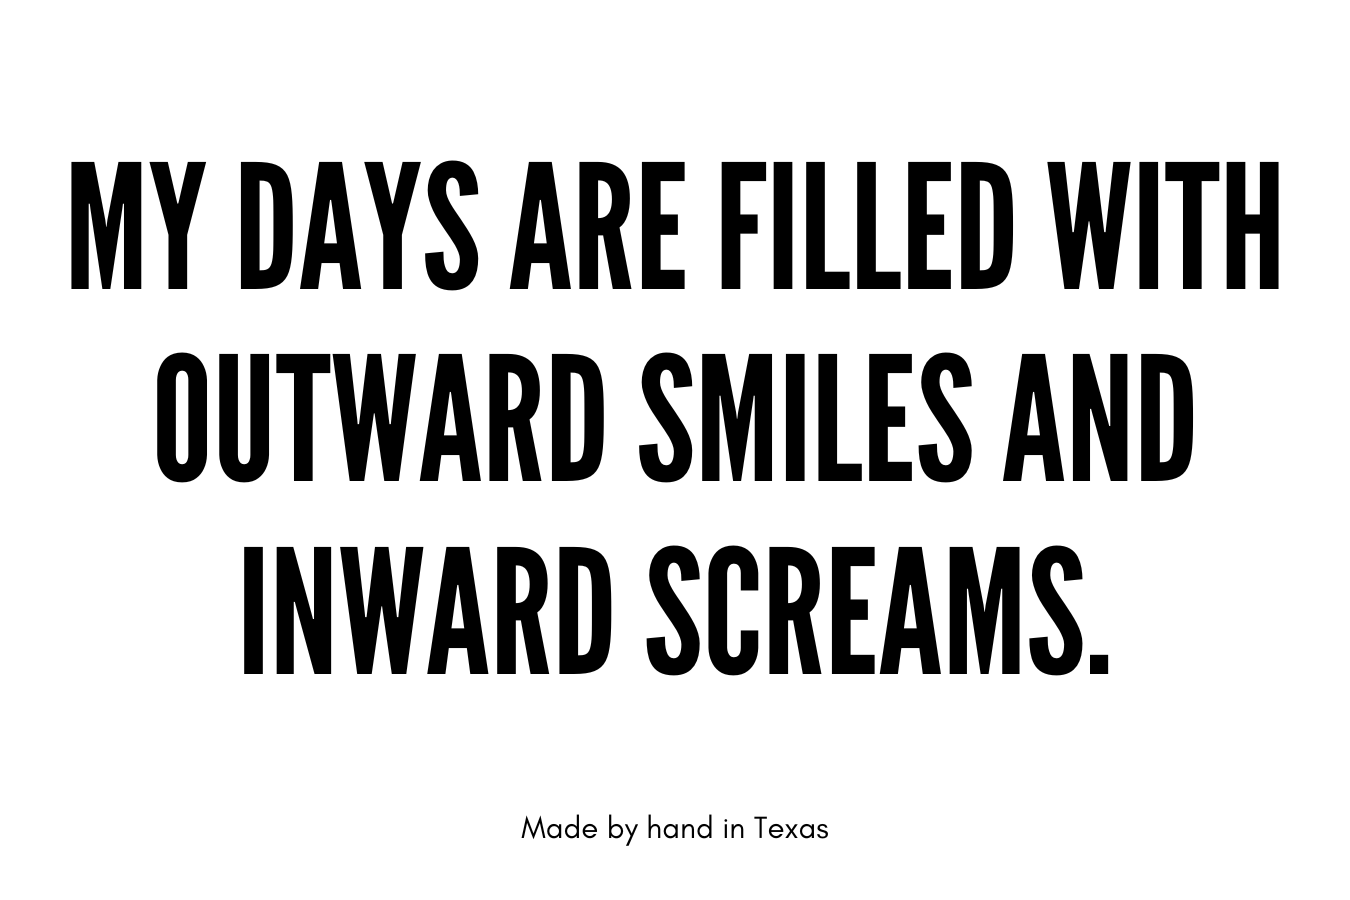 My days are filled with outward smiles and inward screams.